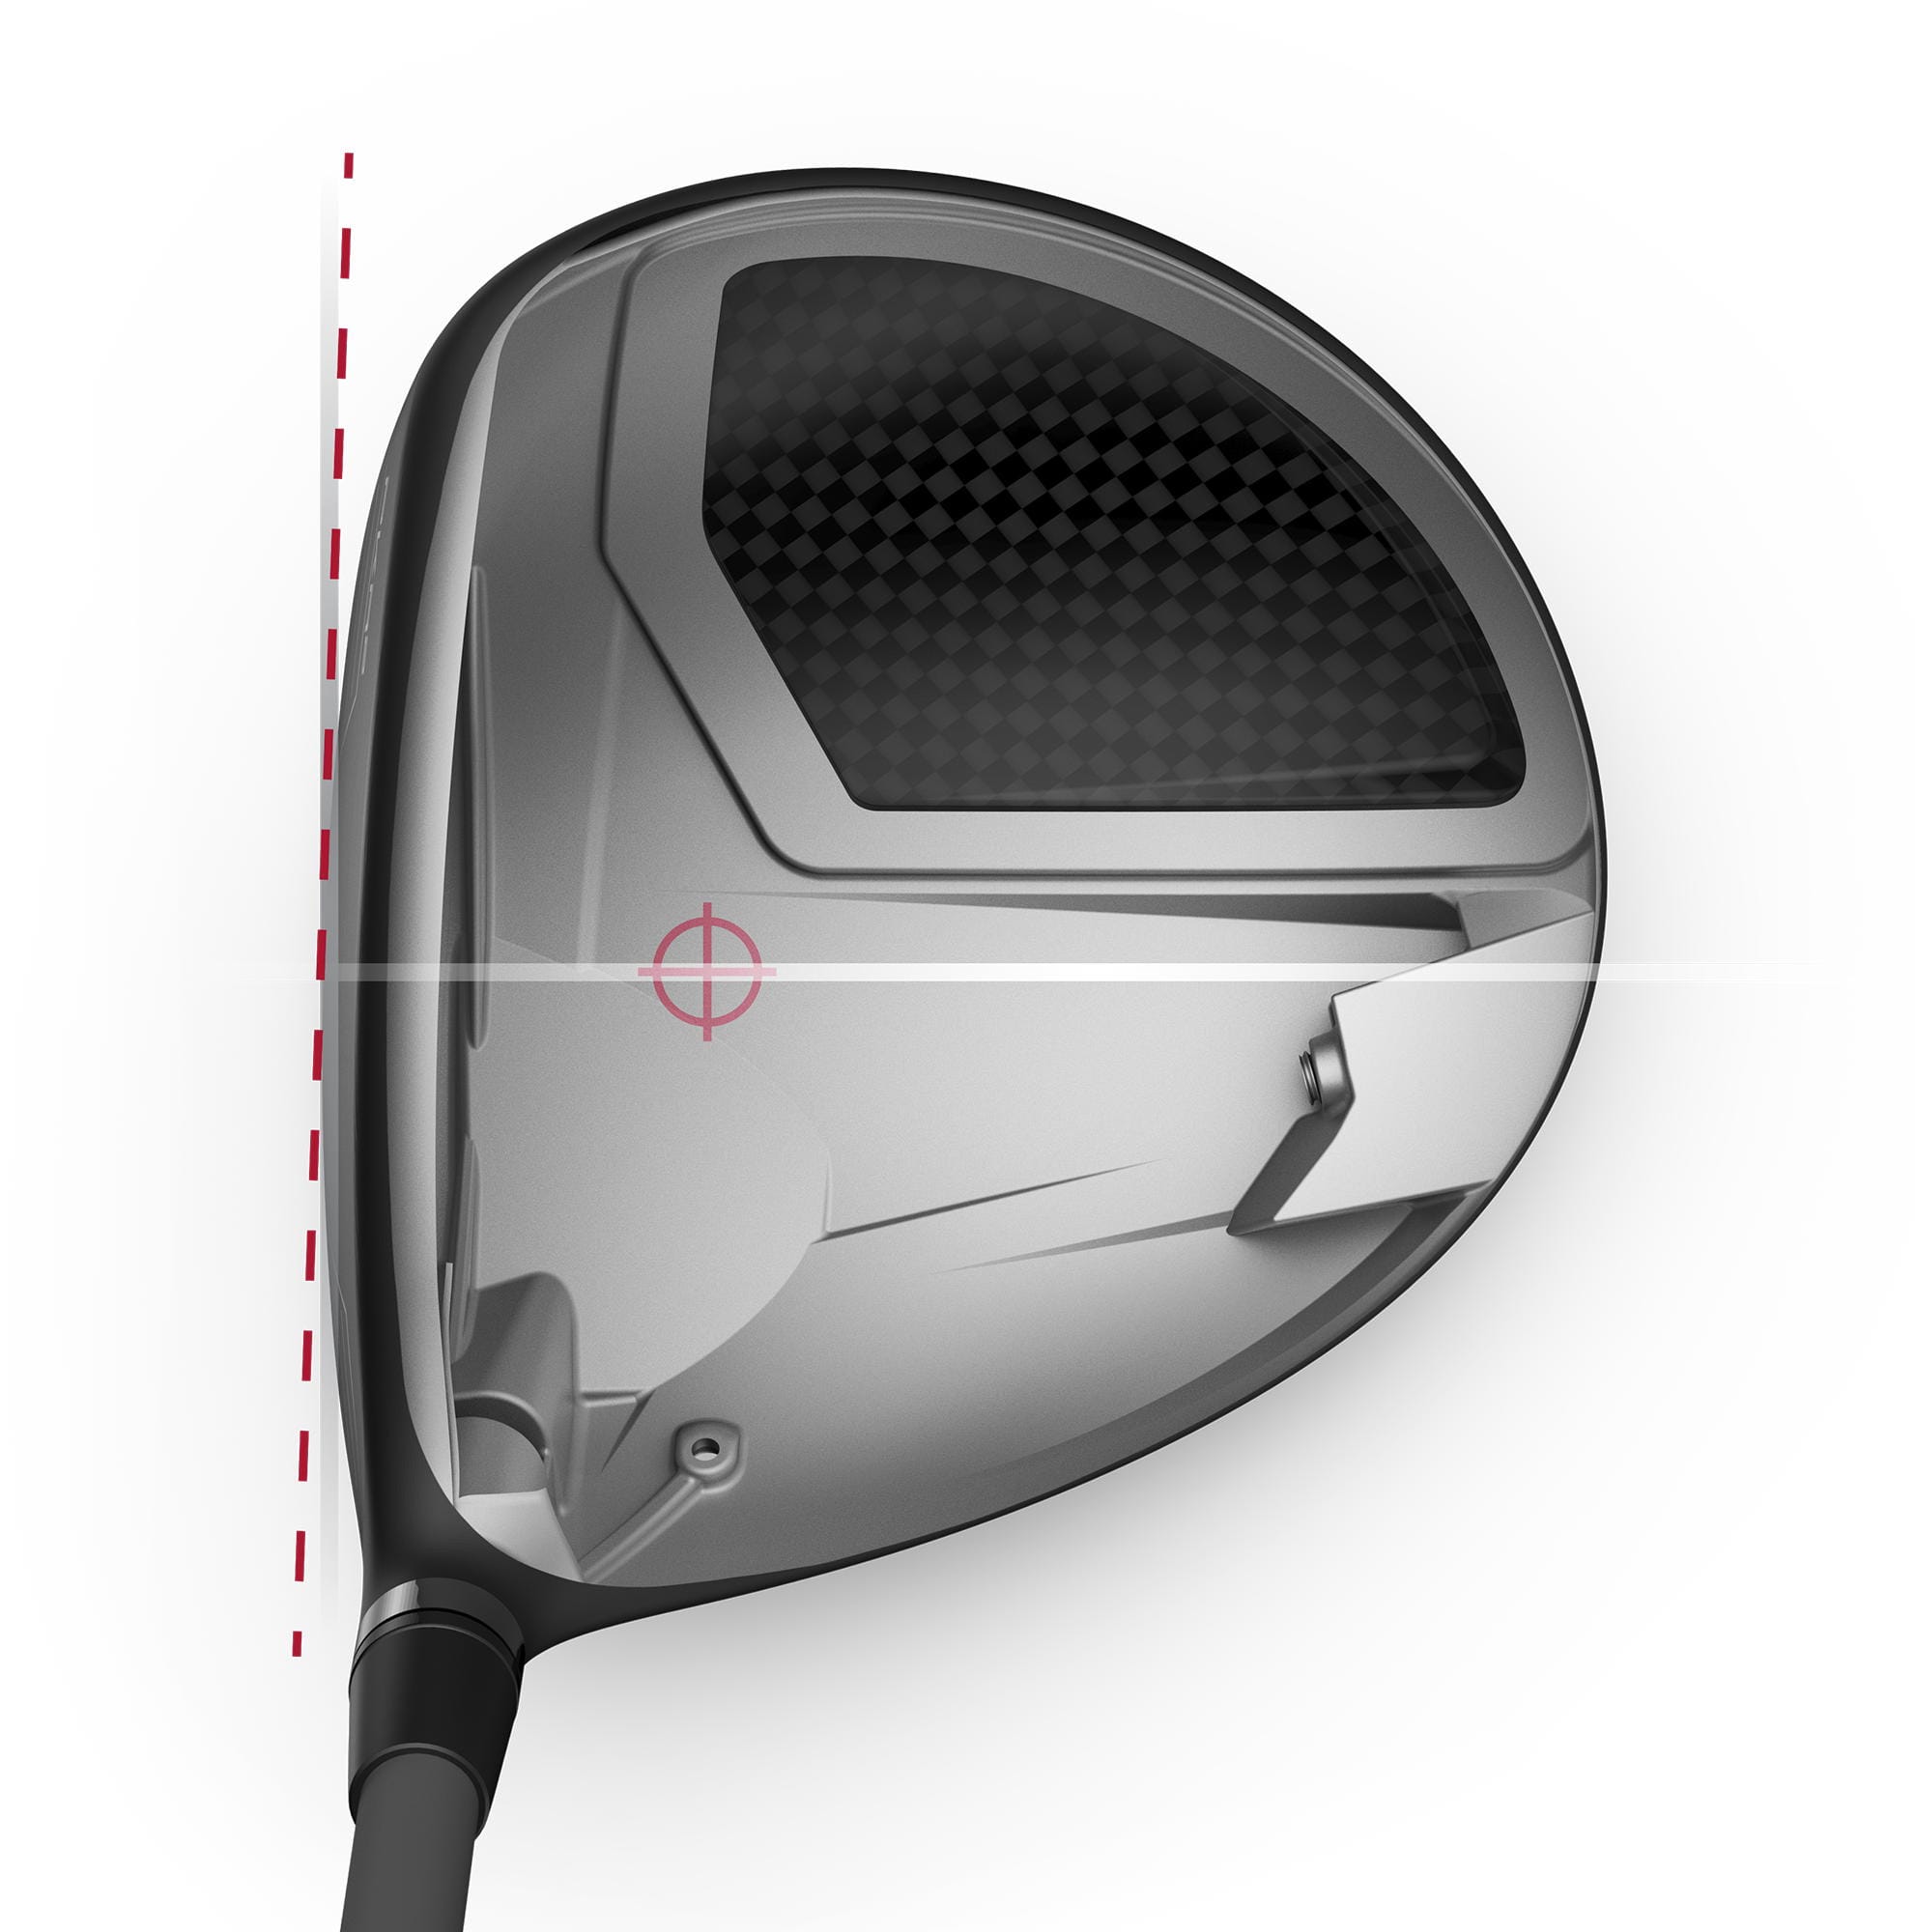 Wilson DYNAPWR Carbon Driver